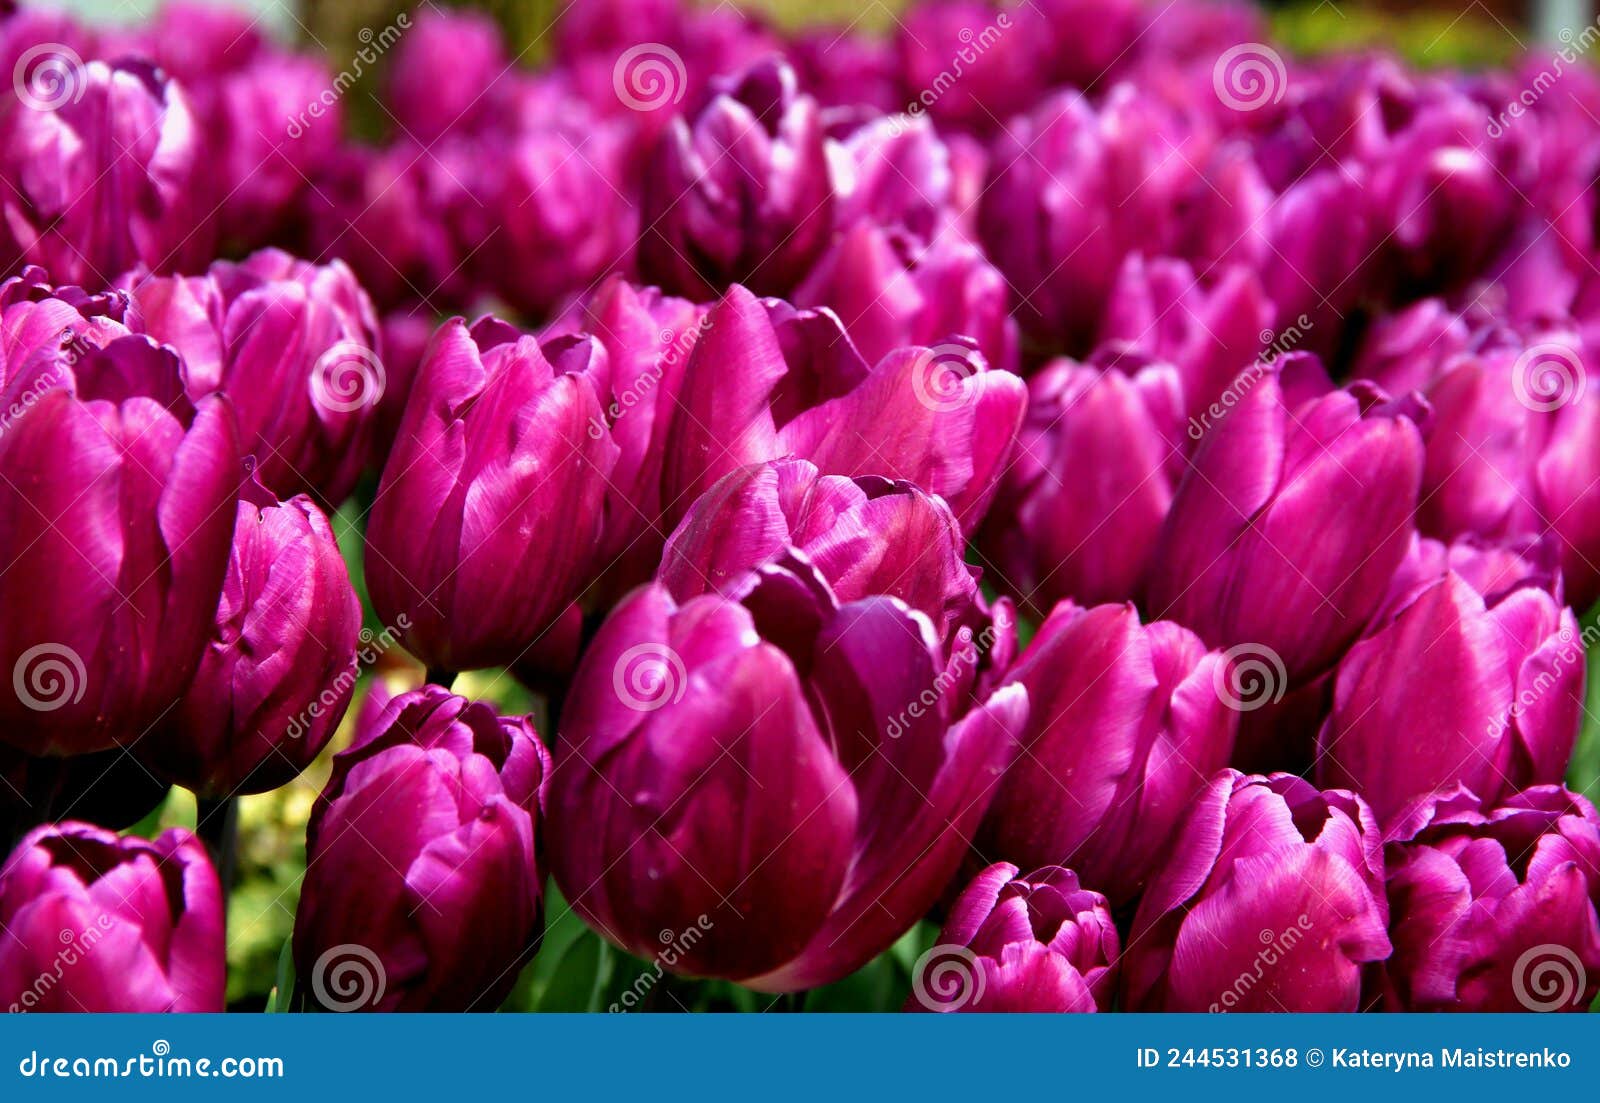 purple tulips close up at goztepe park in istanbul, turkey